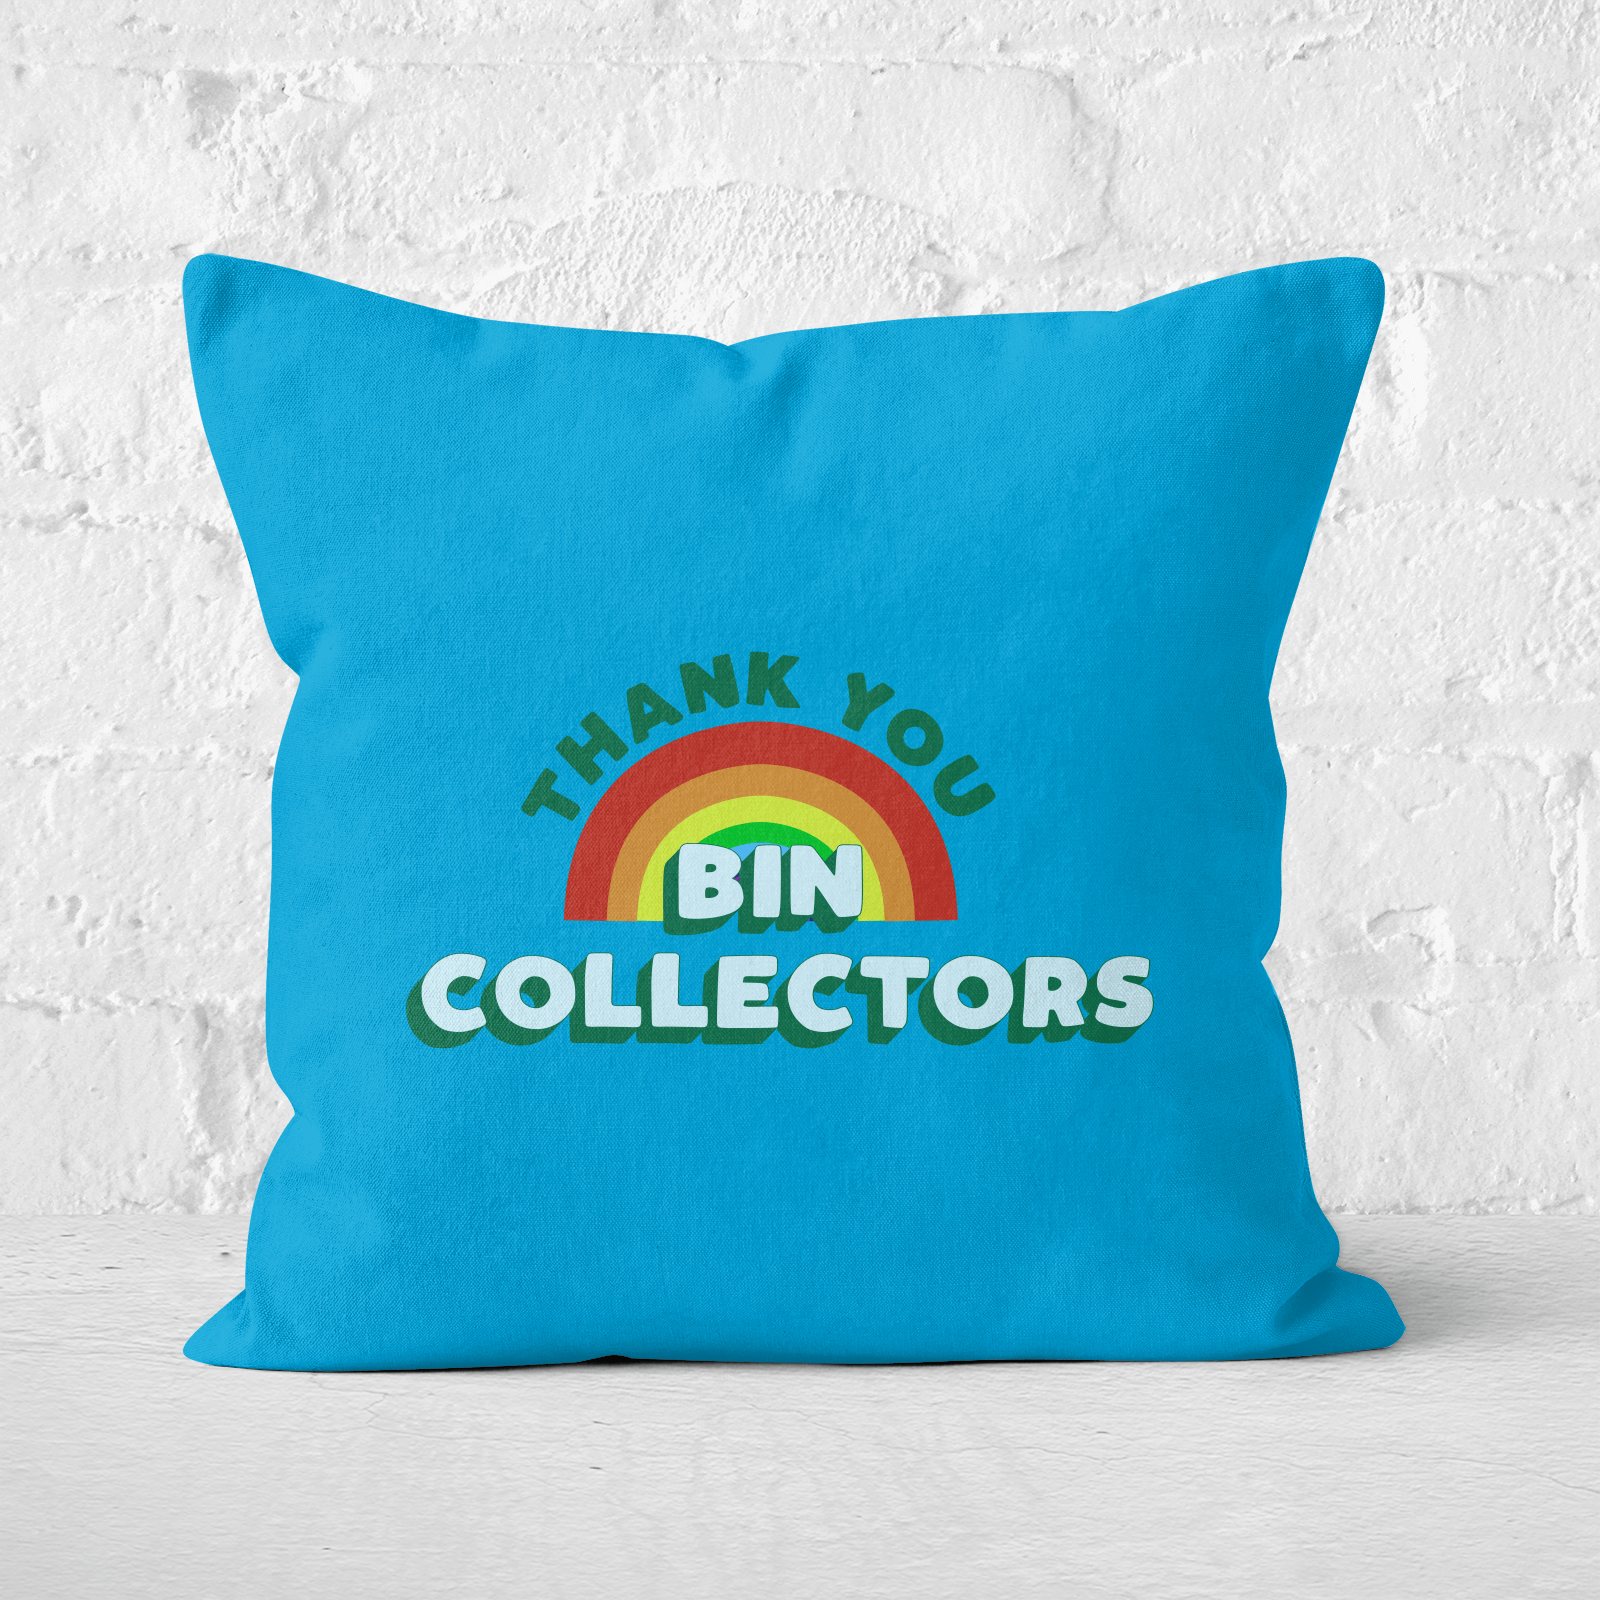 Thank You Bin Collectors Square Cushion - 60x60cm - Soft Touch